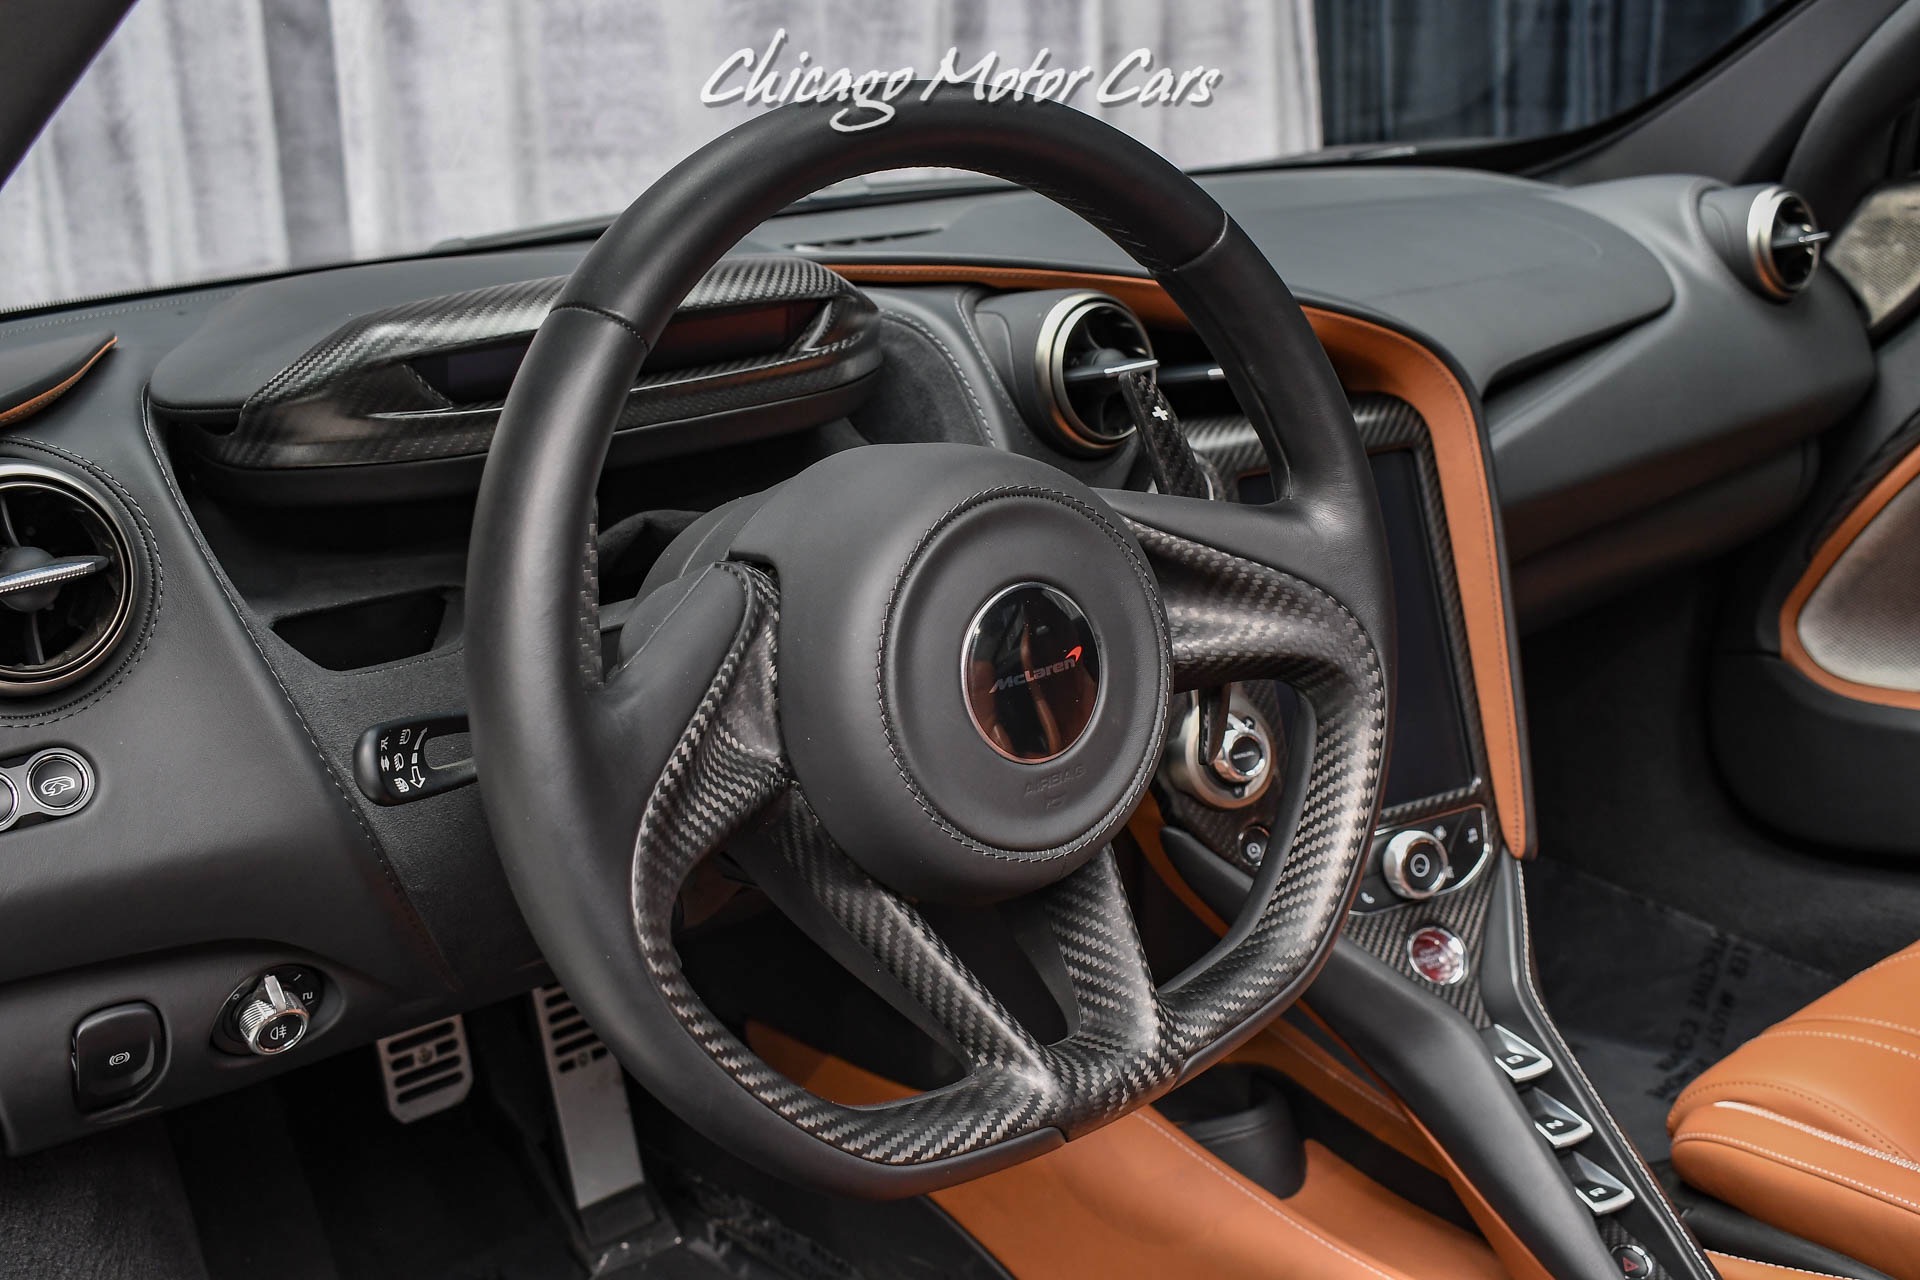 Used-2018-McLaren-720S-Luxury-Coupe-LOADED-WITH-THOUSAND-IN-OPTIONS-TASTEFULLY-MODIFIED